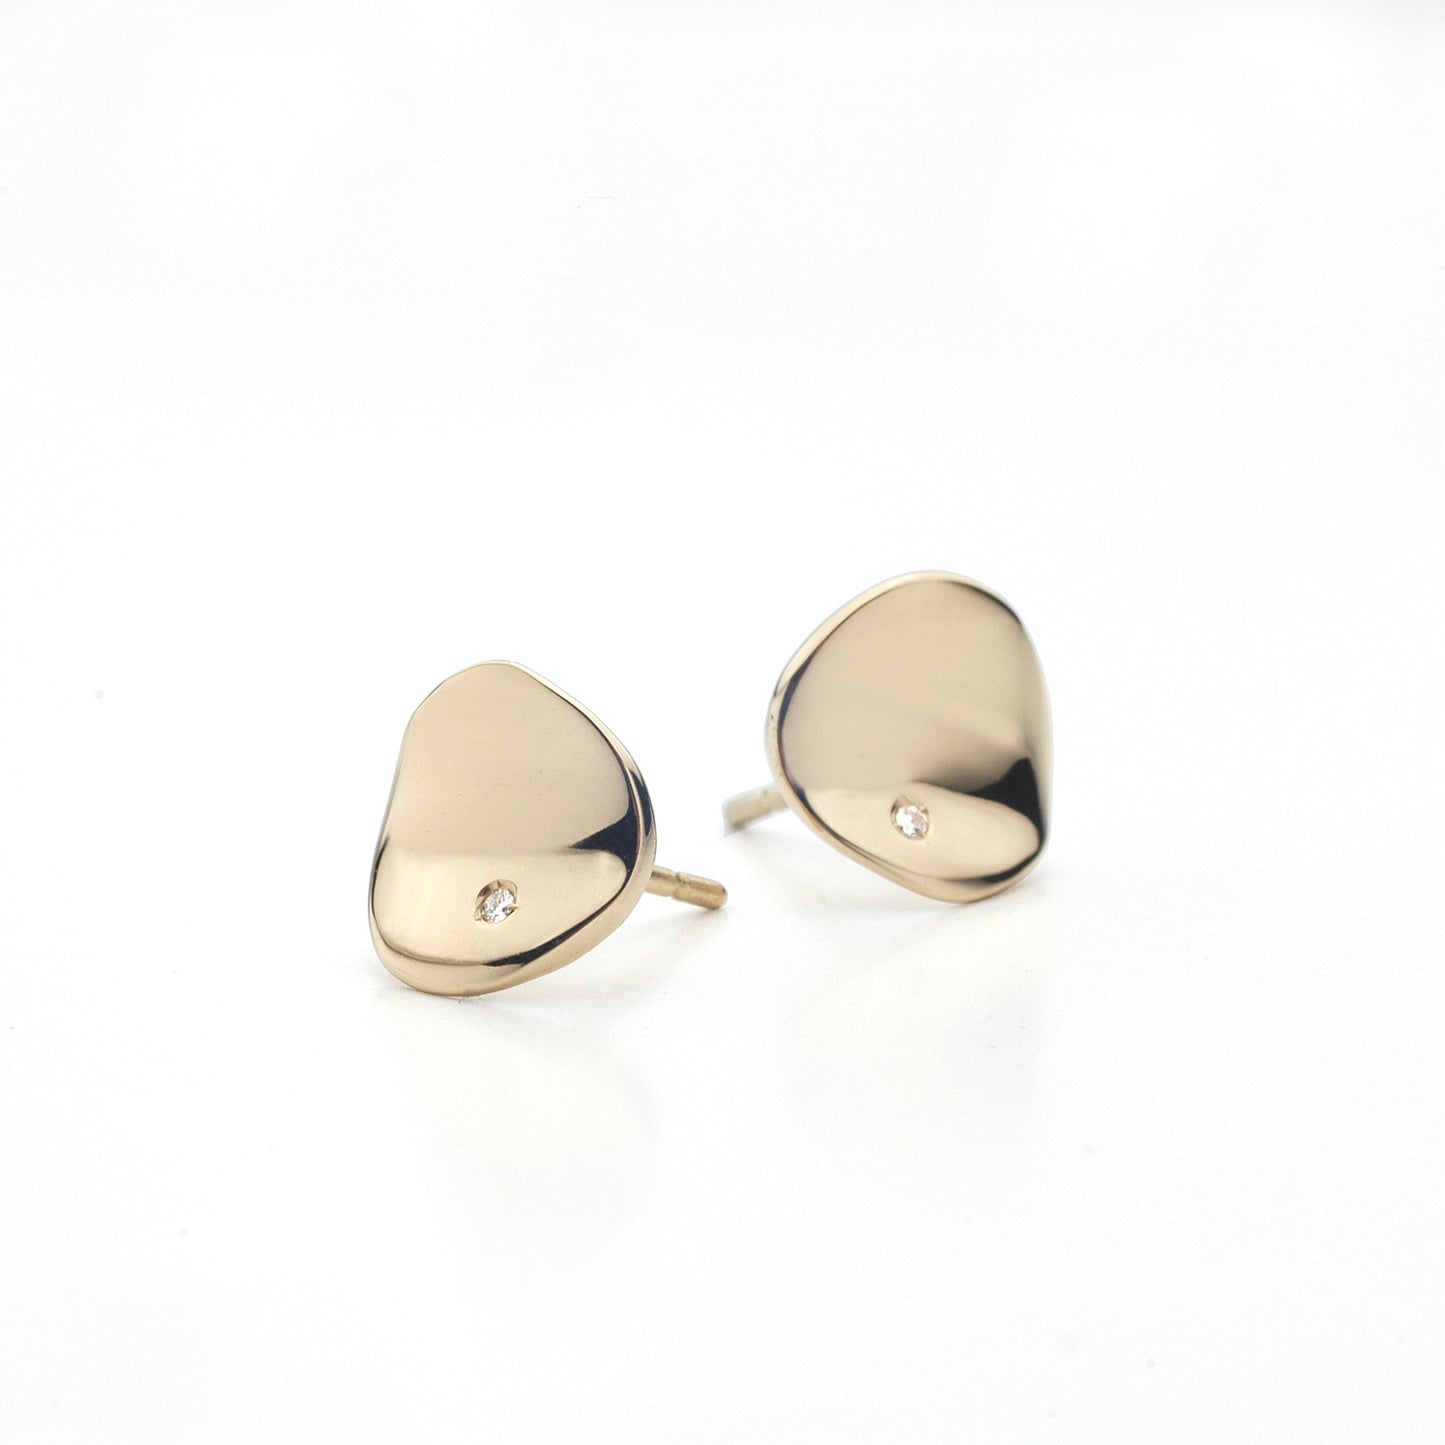 Circle stud earrings in rose gold and diamonds